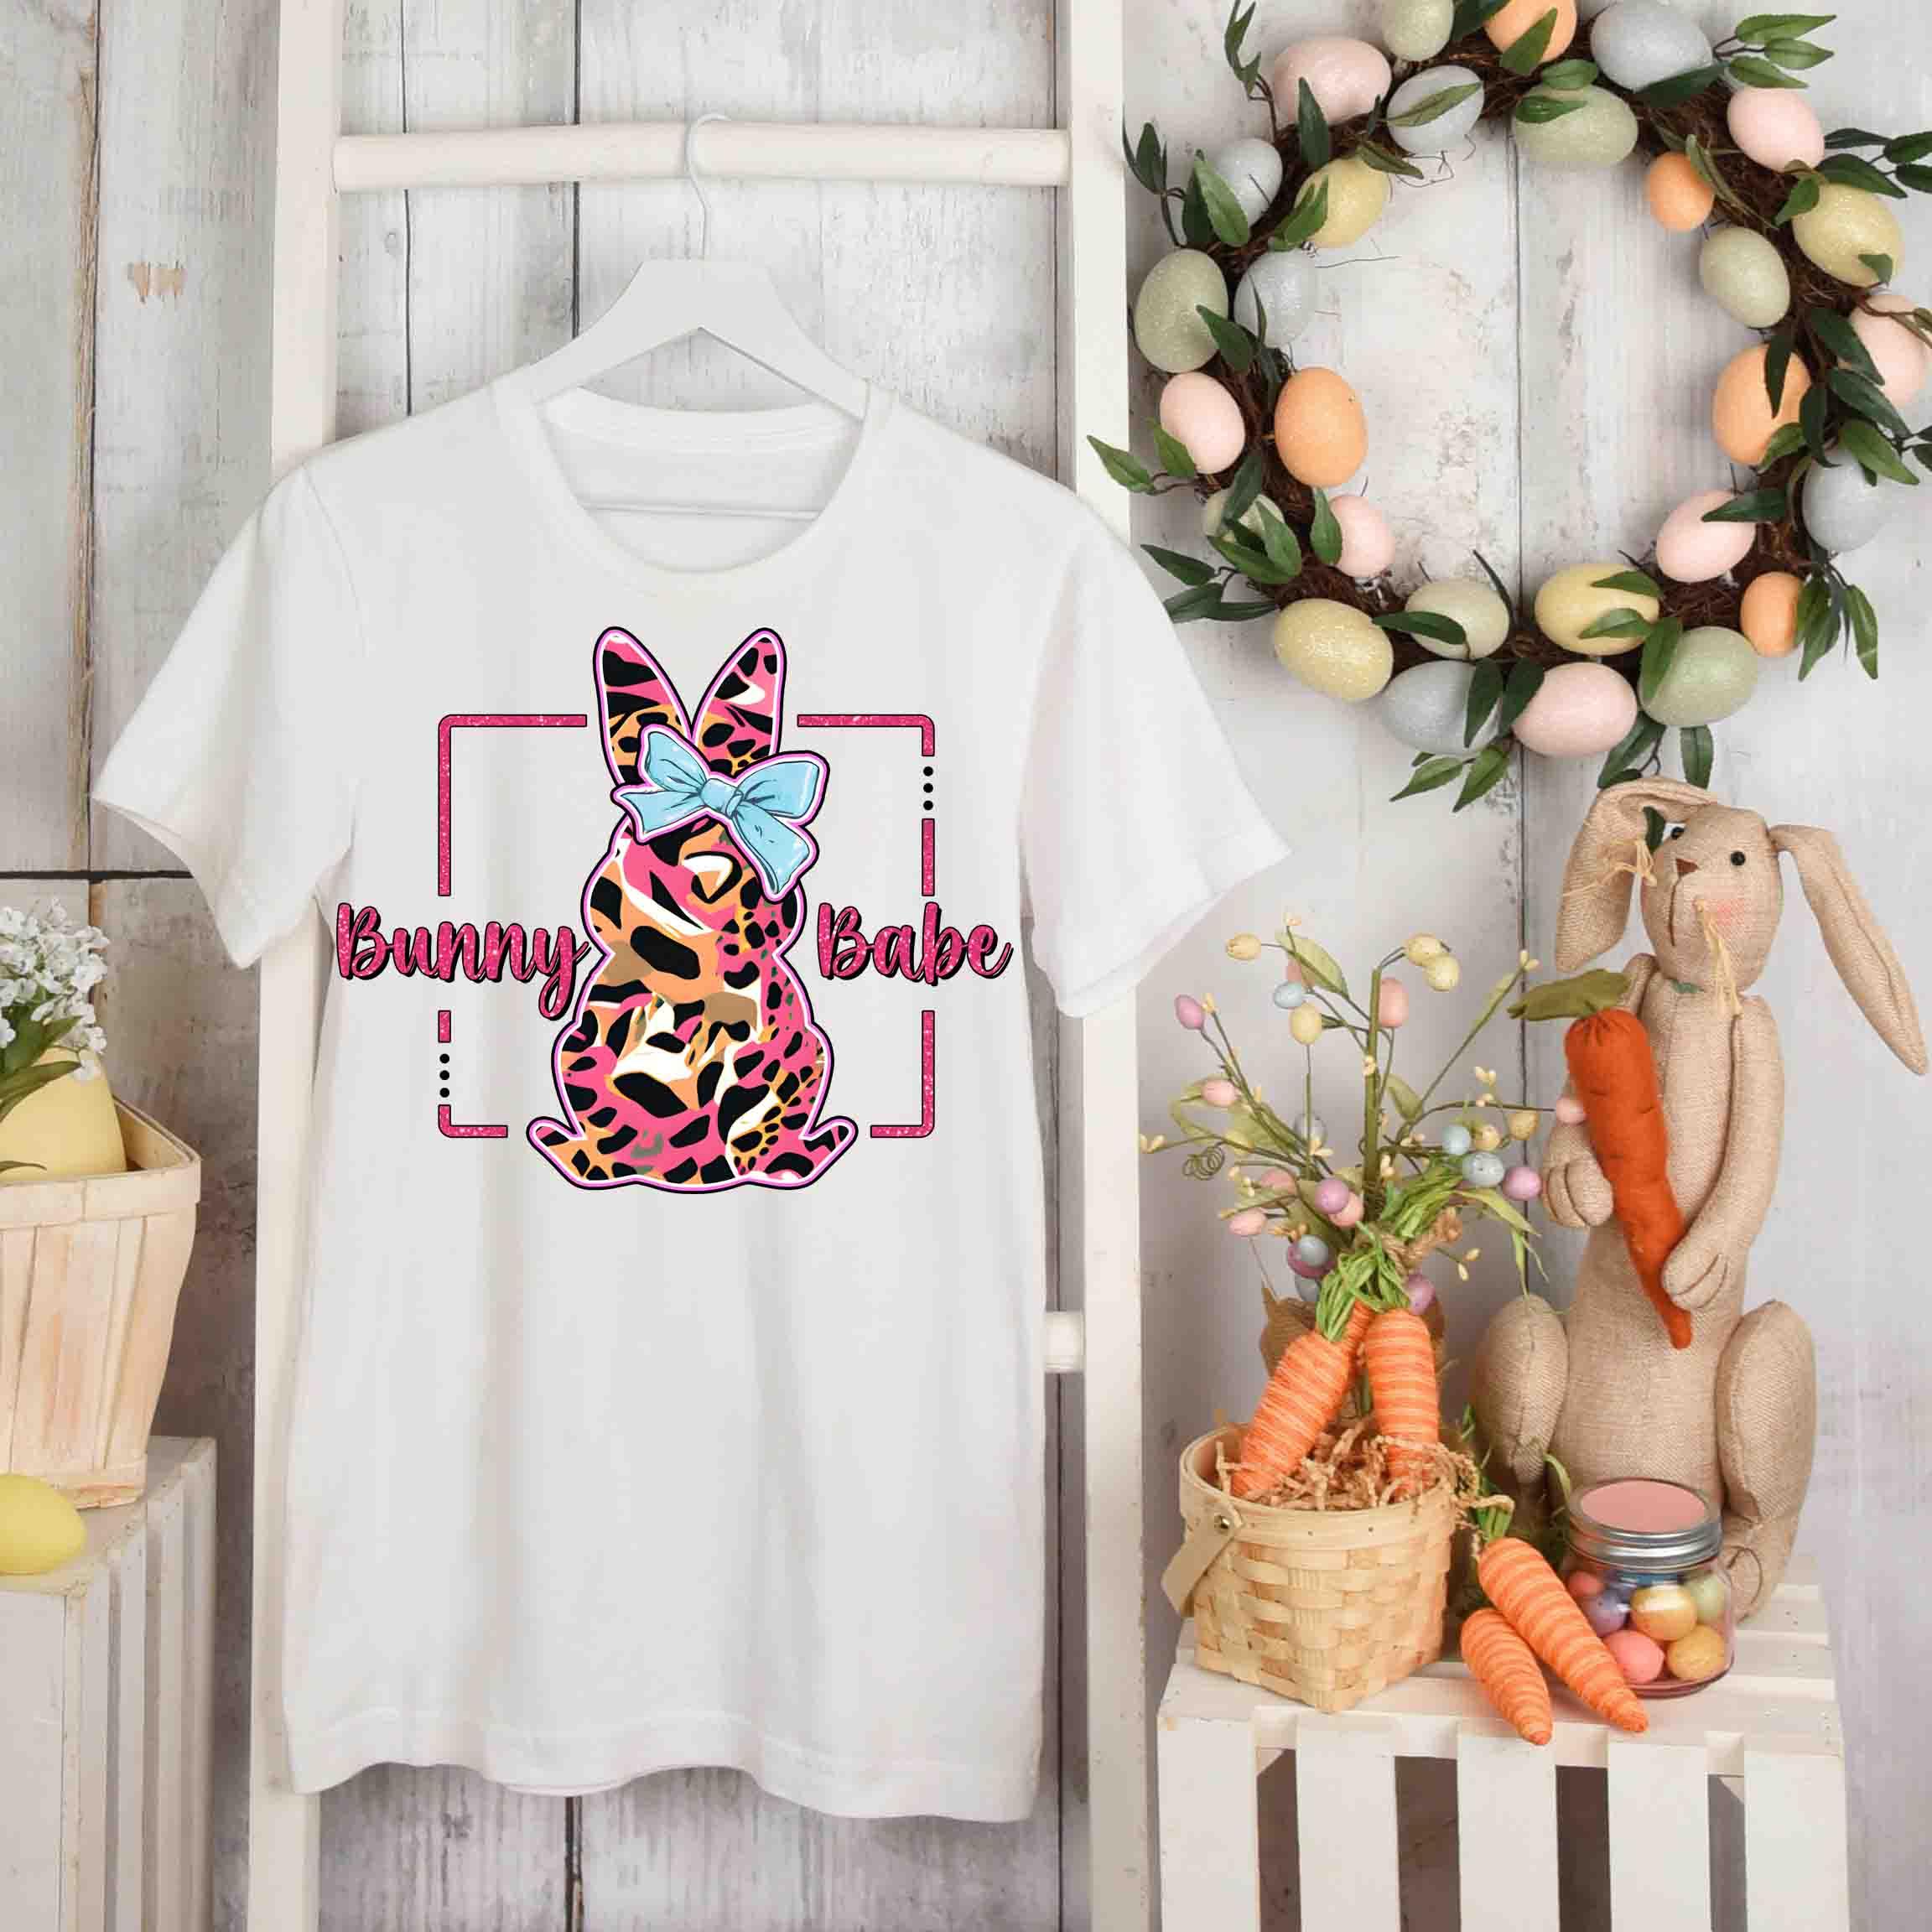 Easter Bunny Tee Unisex Personalized Cotton T-Shirt - Print - VirtuousWares:Global